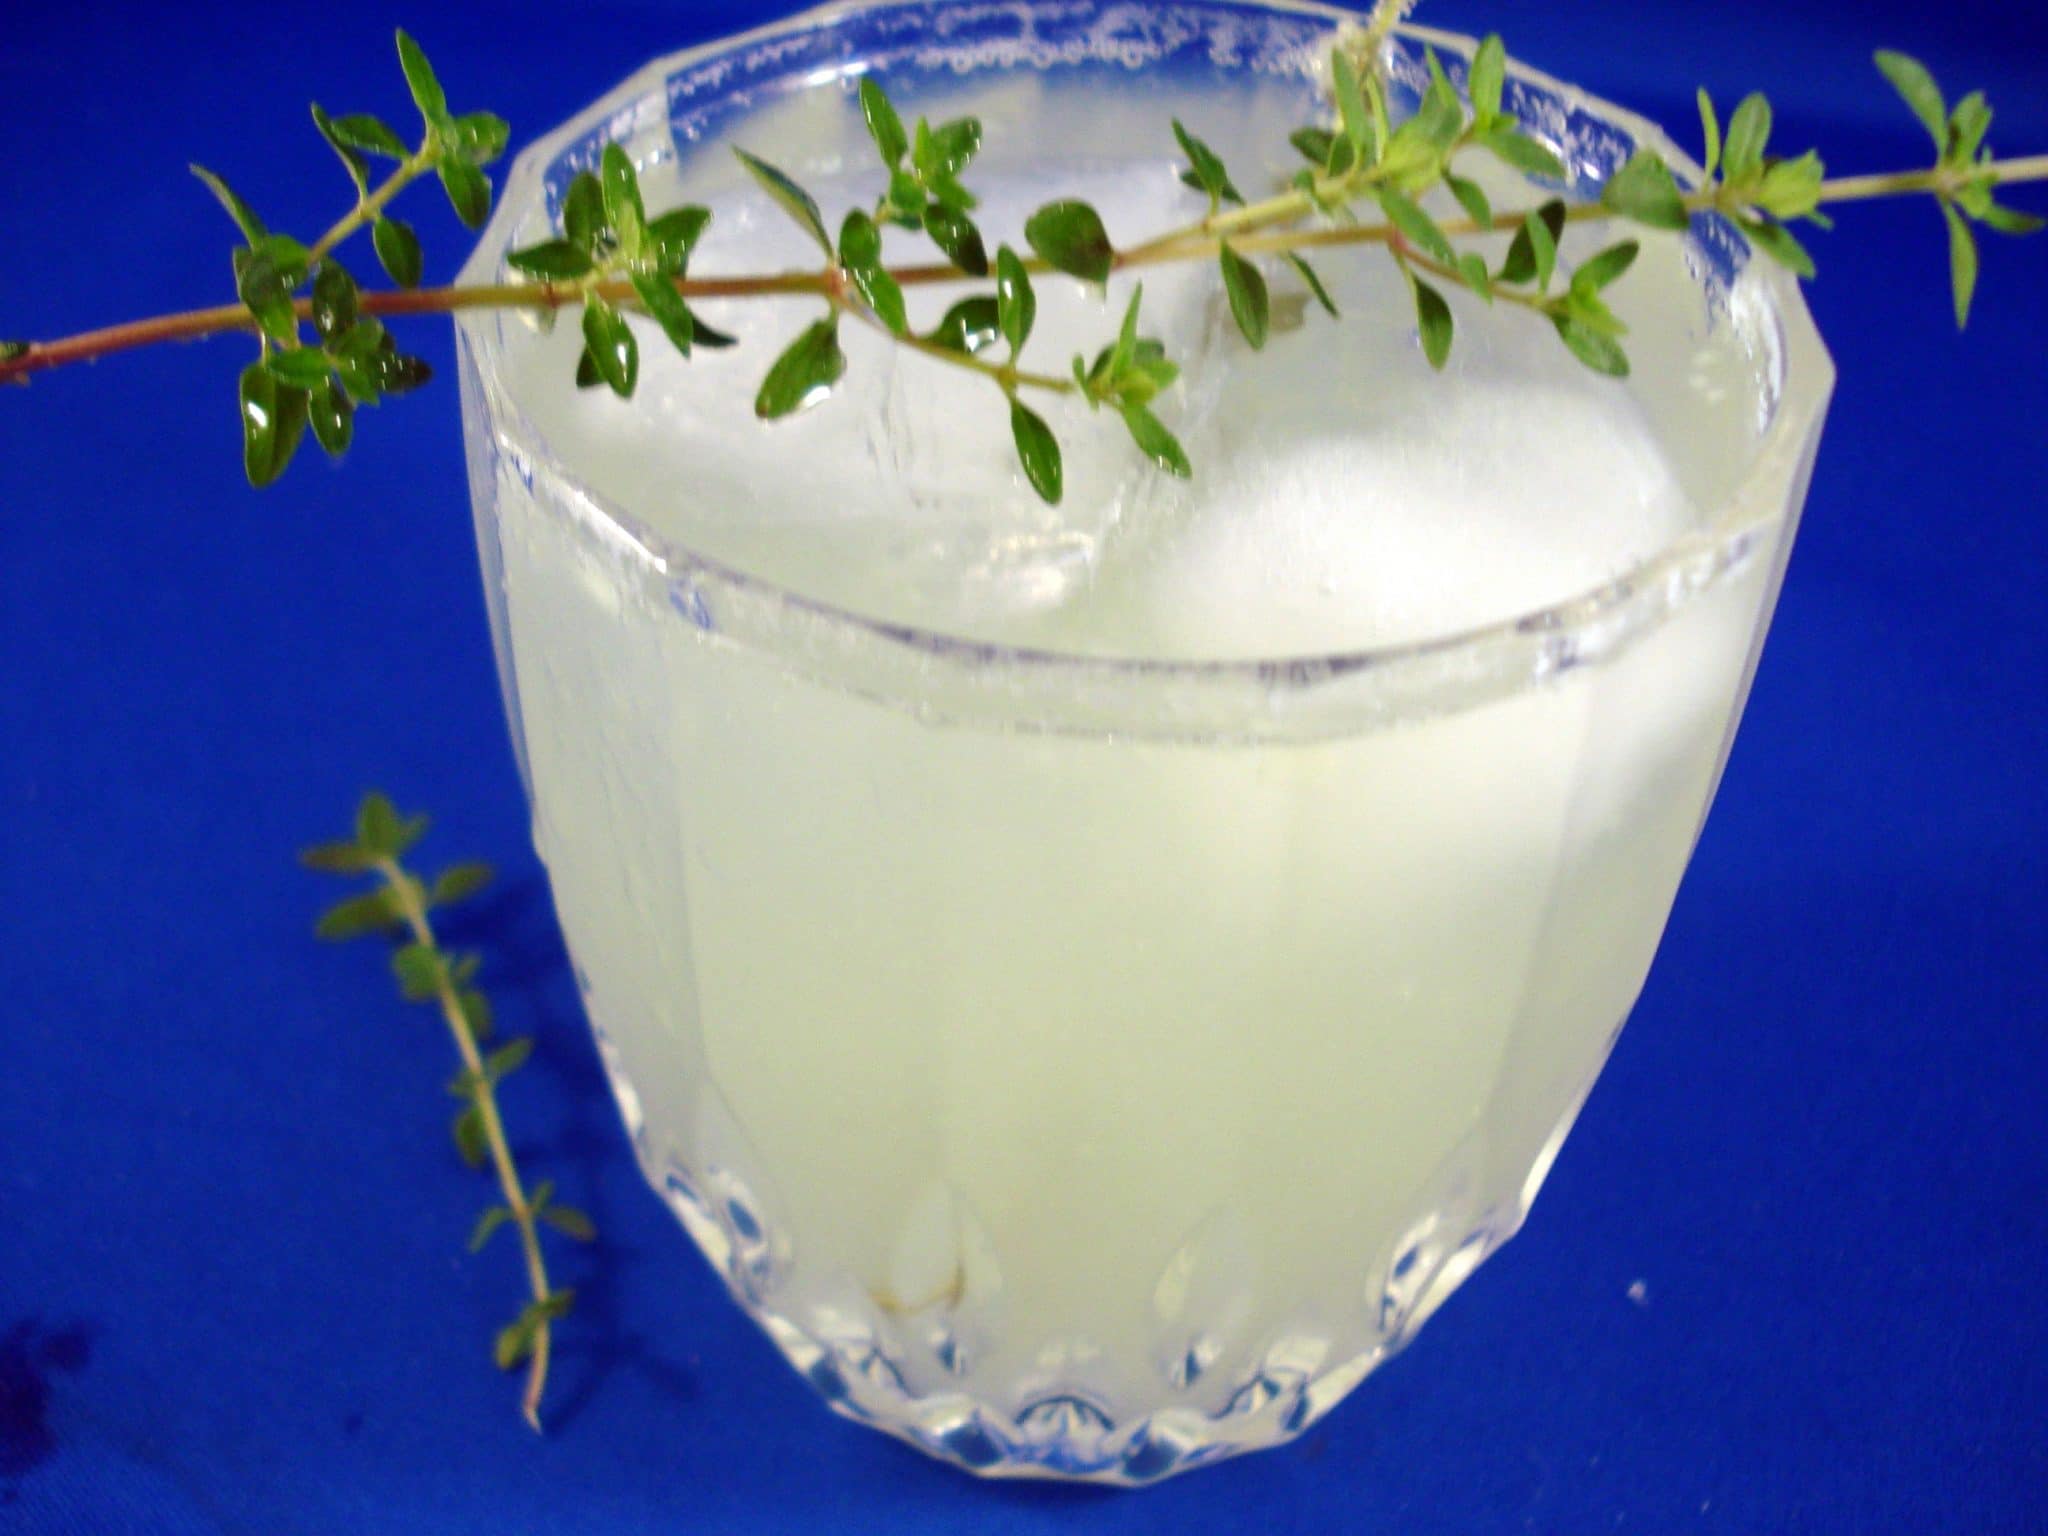 Cucumber-Thyme Cocktail with sprig of thyme on top